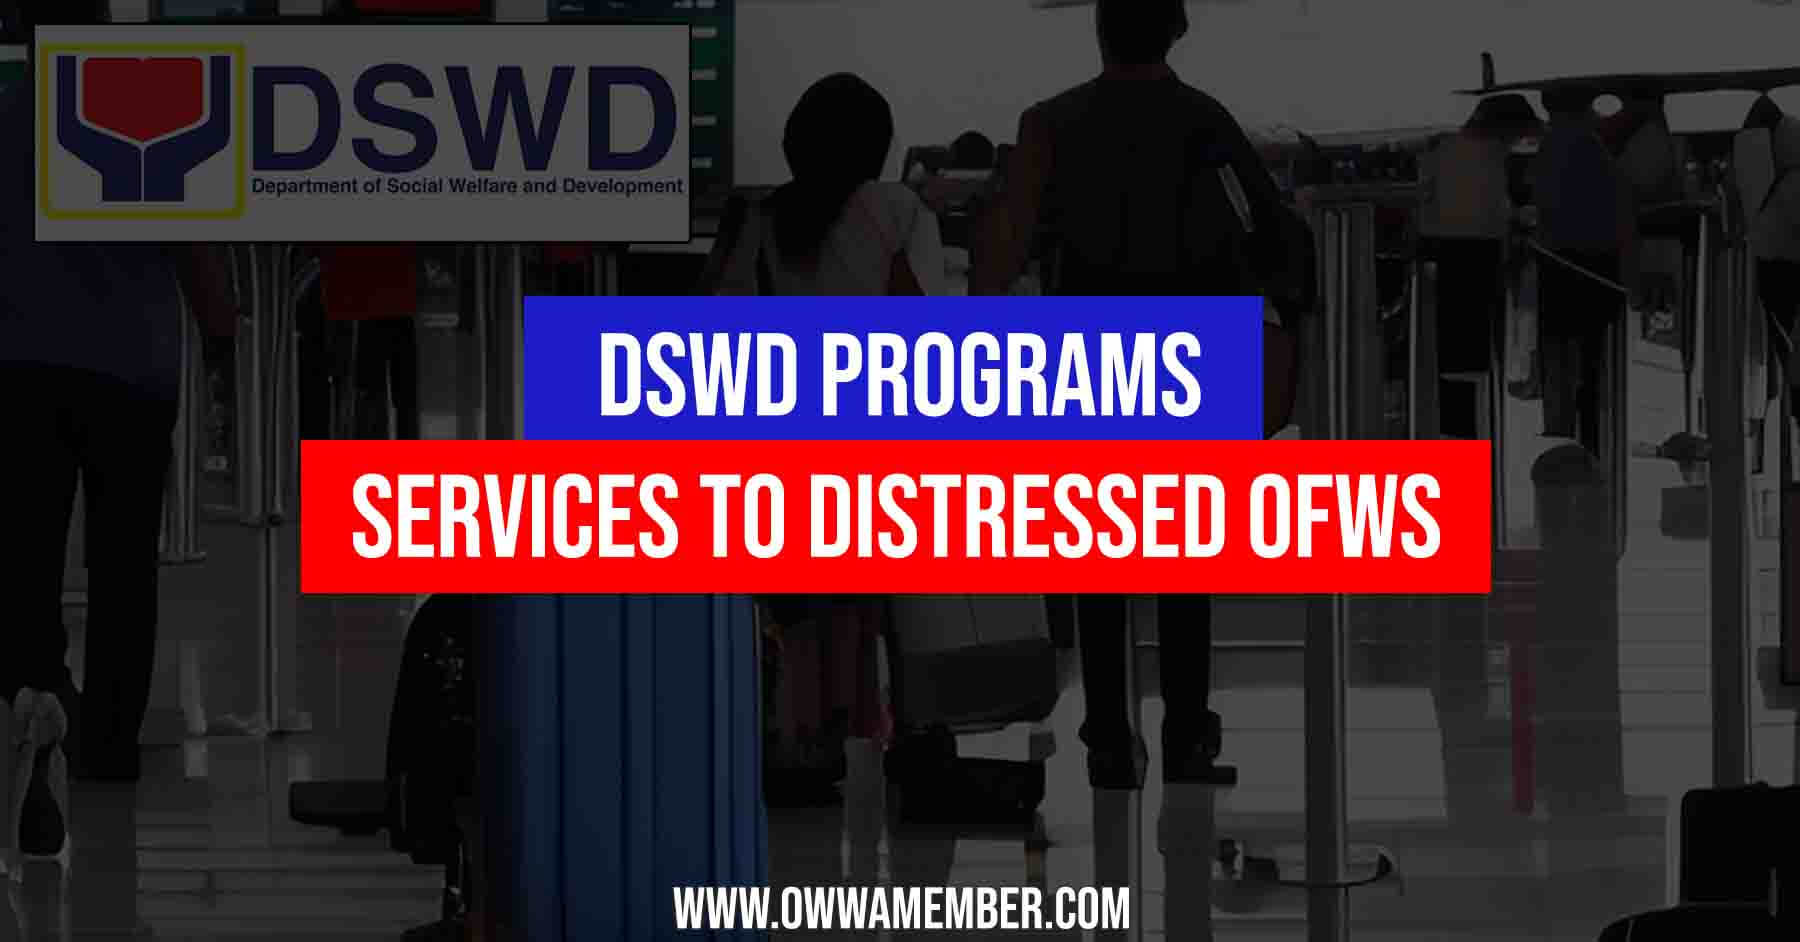 dswd programs and services for distressed ofws